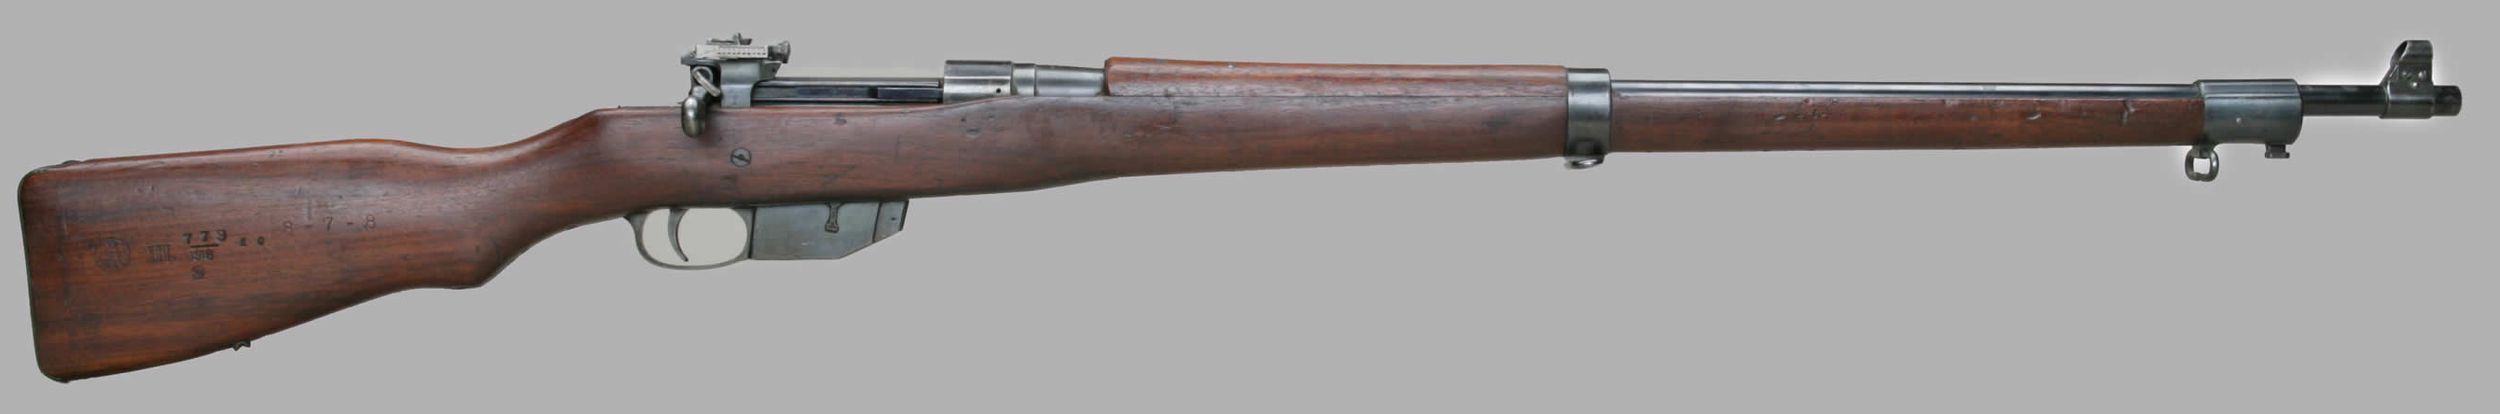 An original Ross MKIII rifle. The weapon was handsome but fragile.